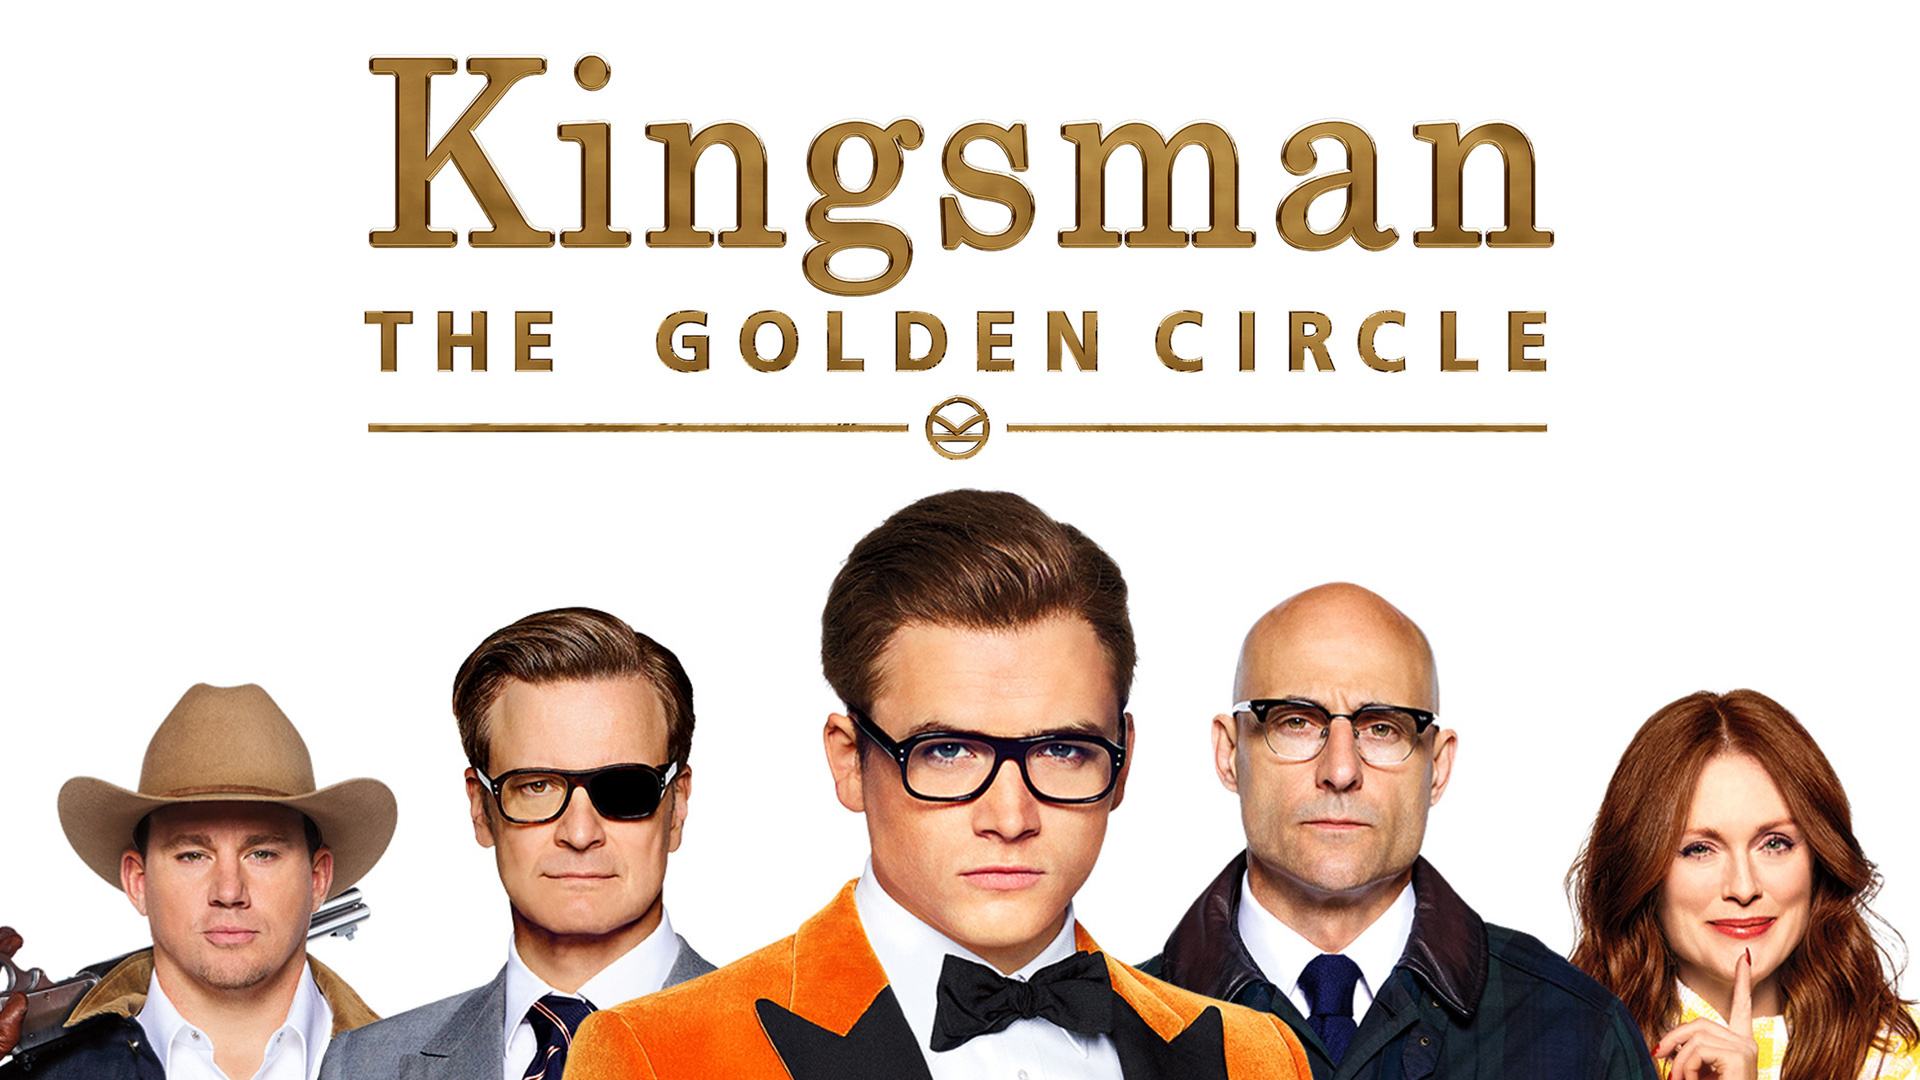 Kingsman: The Golden Circle, Stylish wallpapers, Christopher Walker's collection, Movie-inspired, 1920x1080 Full HD Desktop